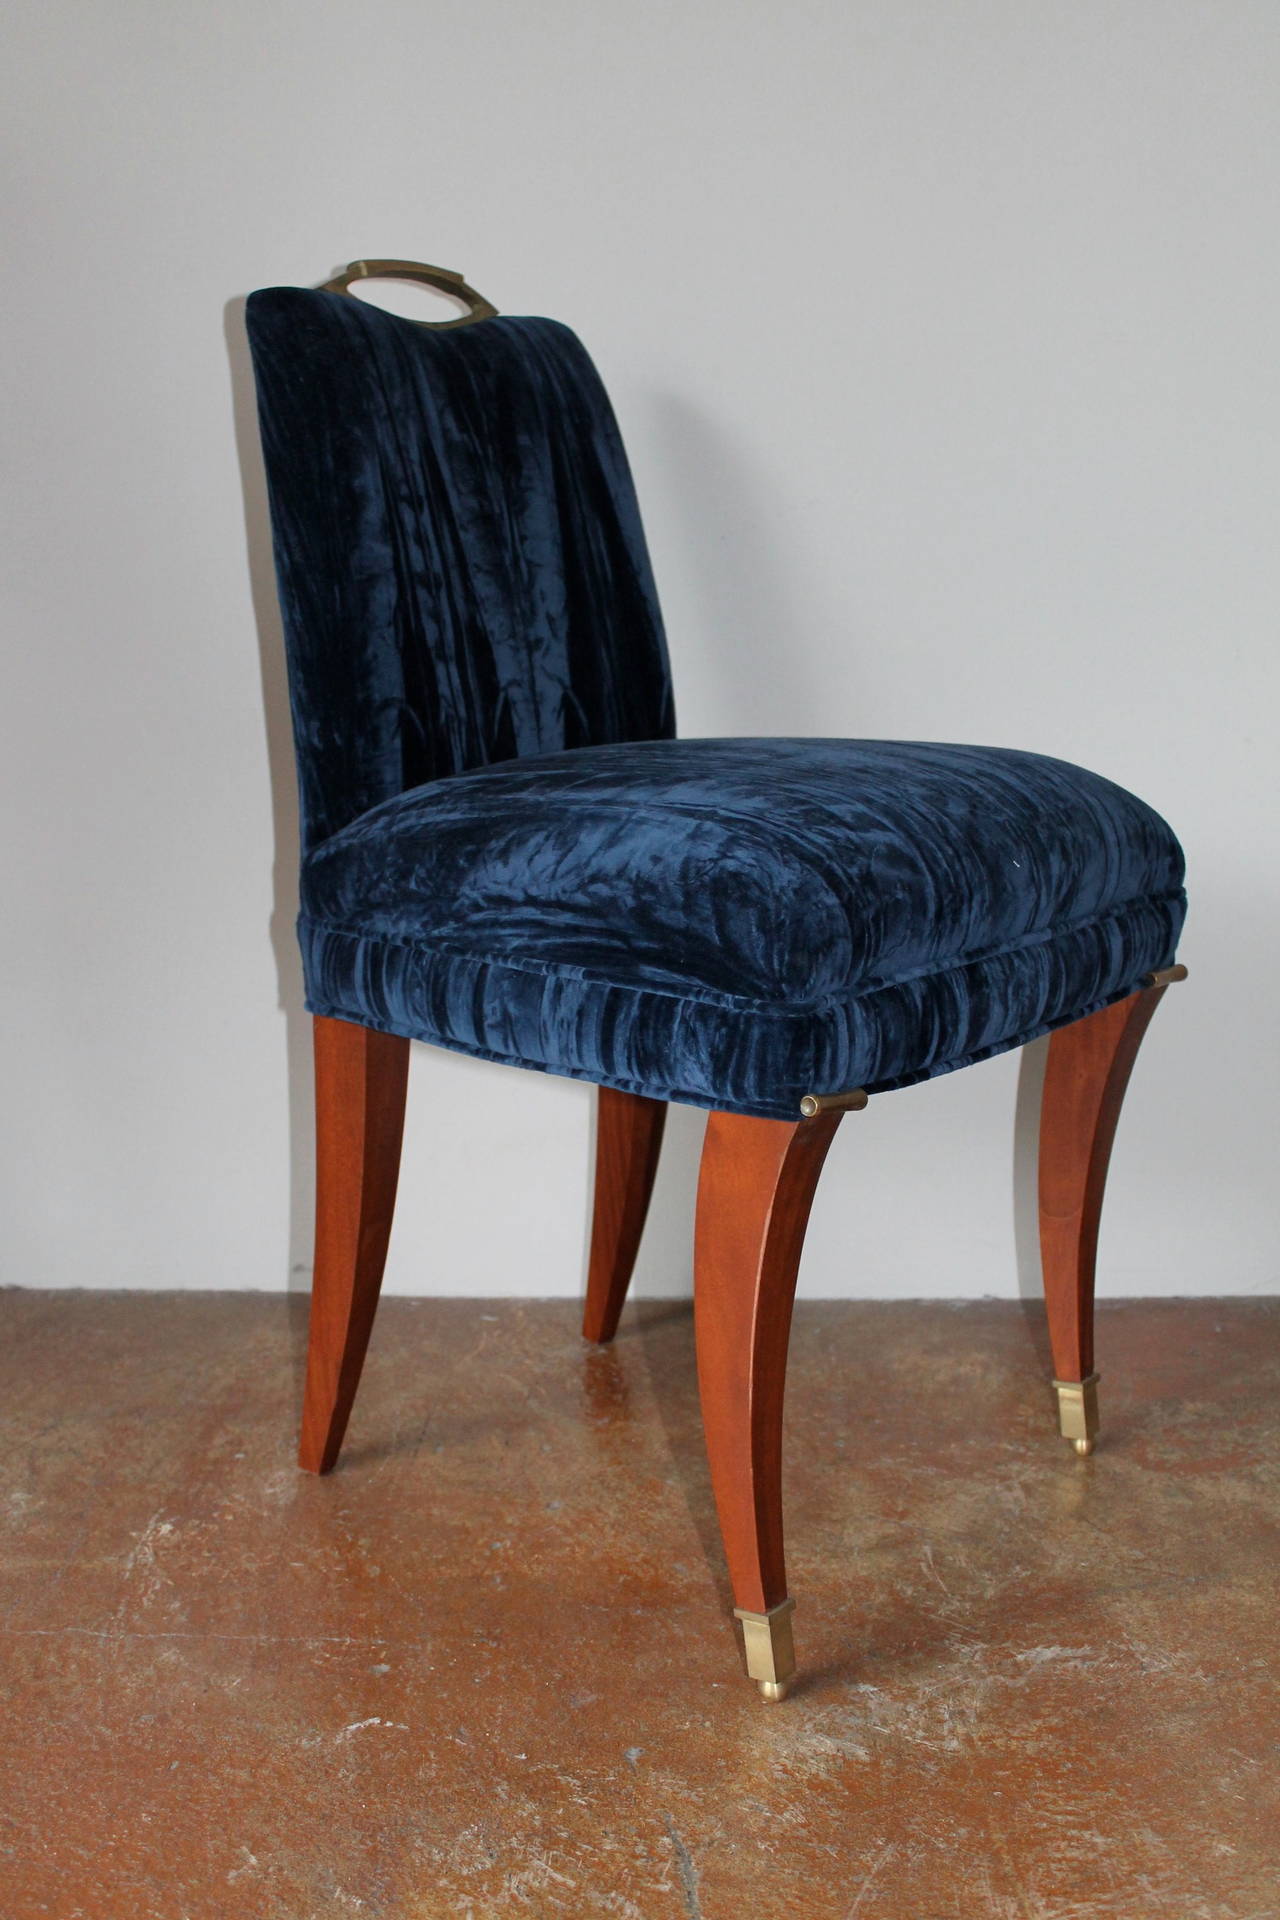 Arturo Pani Mahogany and Crushed Blue Velvet Dining Chairs, Mexico, 1950s 2